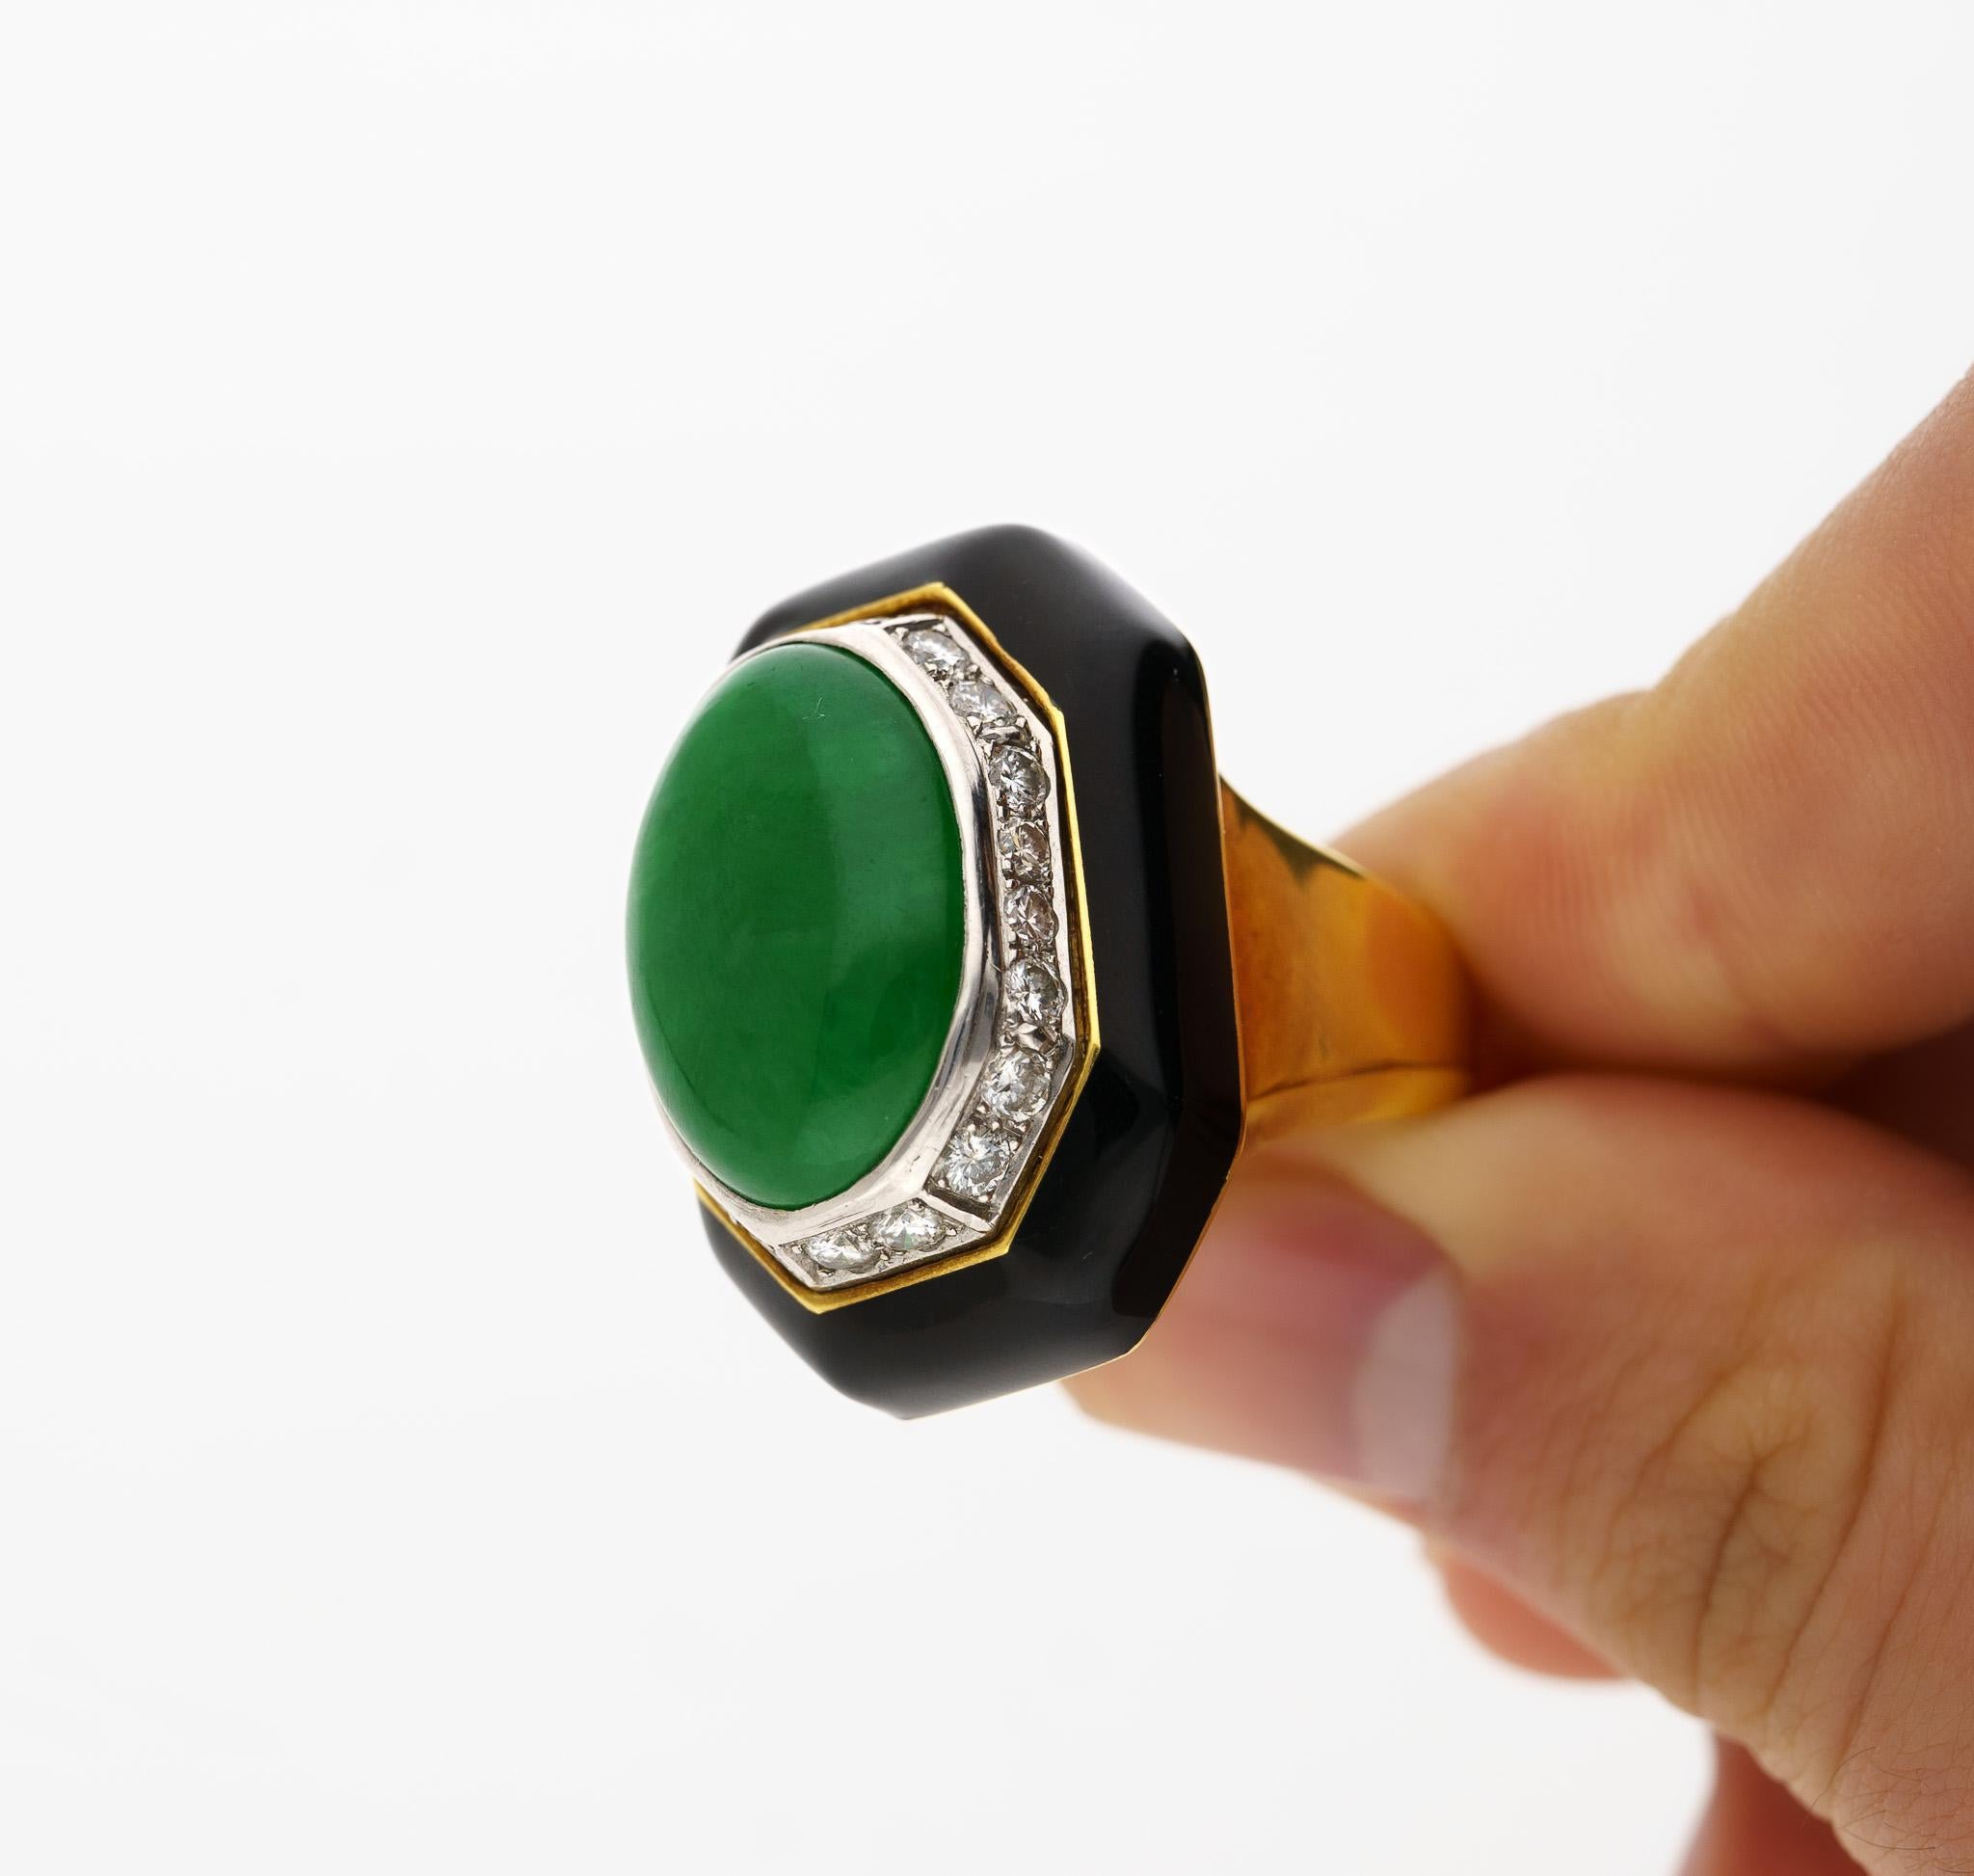 Cabochon David Webb Signed Type A Fei Chui Jadeite Jade and Onyx Platinum & 18K Ring For Sale